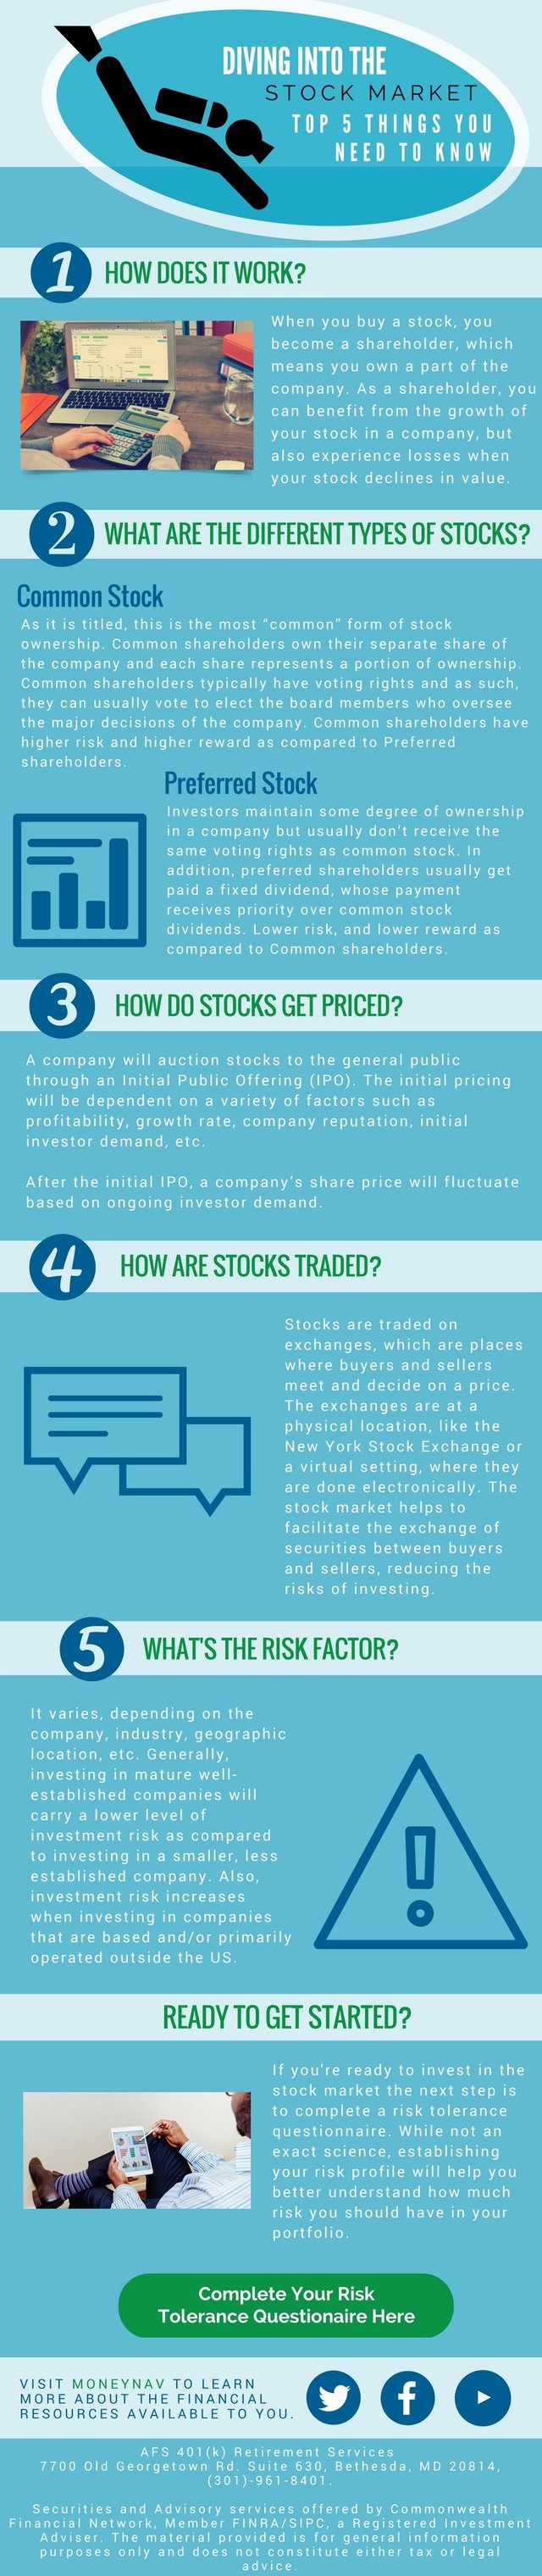 Infographic: Top 5 Things Every Beginning Investor Needs to Know About ...